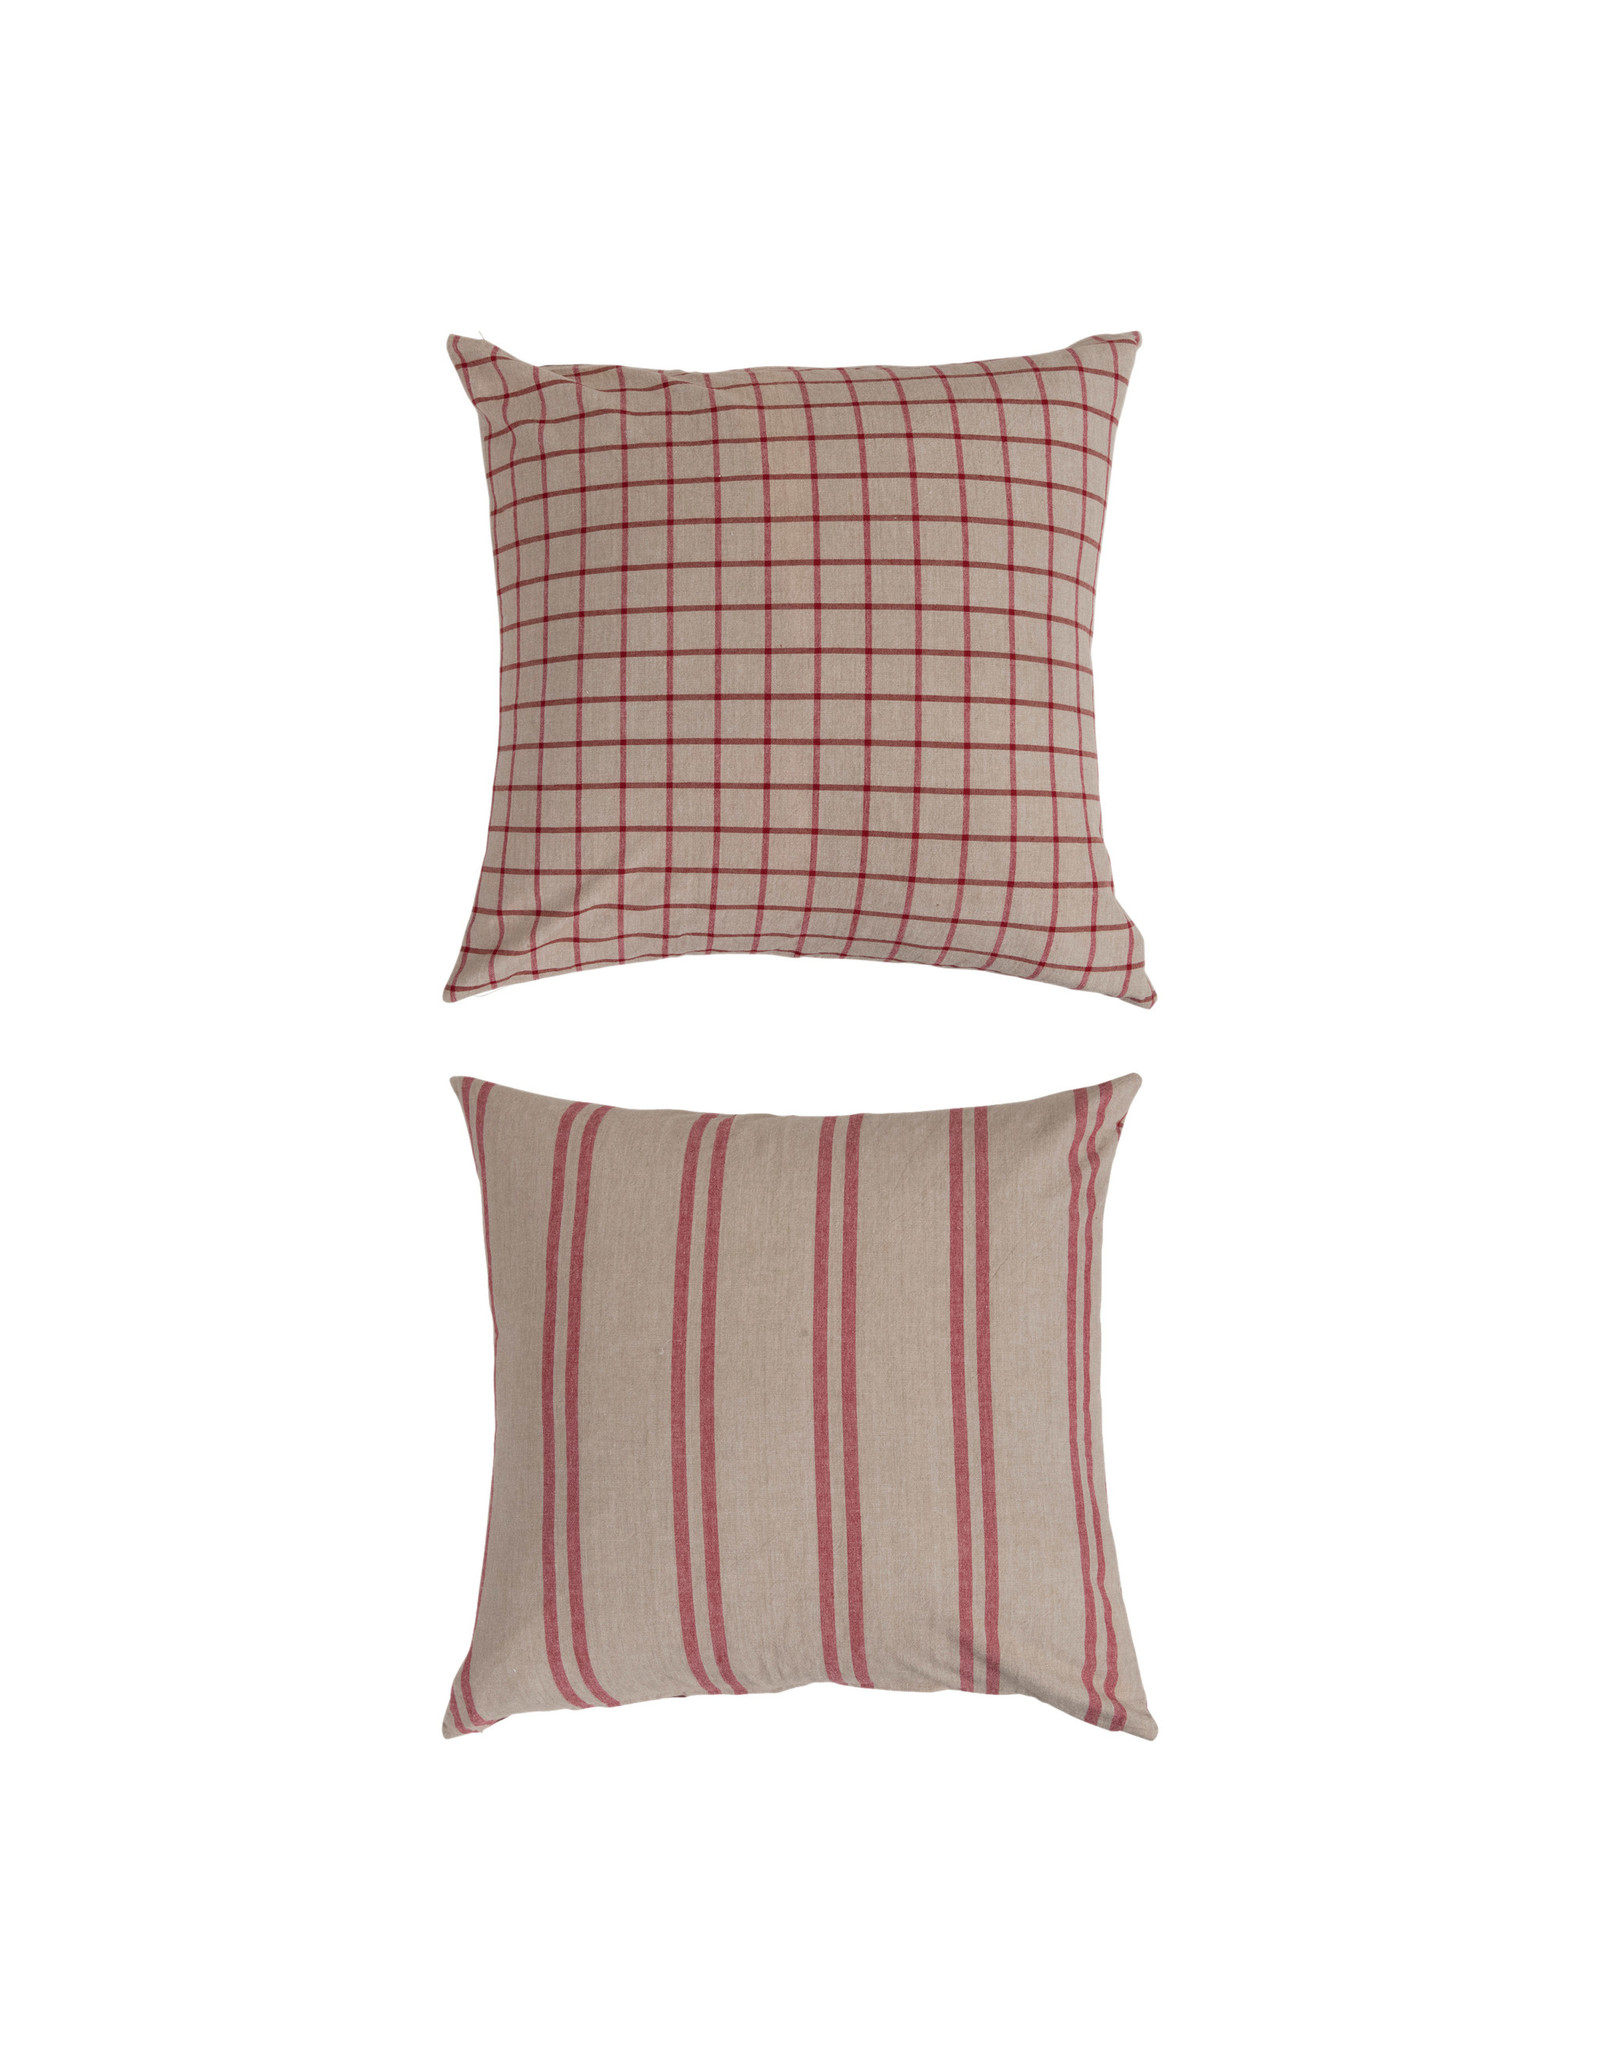 XM9947 26" Two-Sided Stonewashed Woven Cotton Pillow